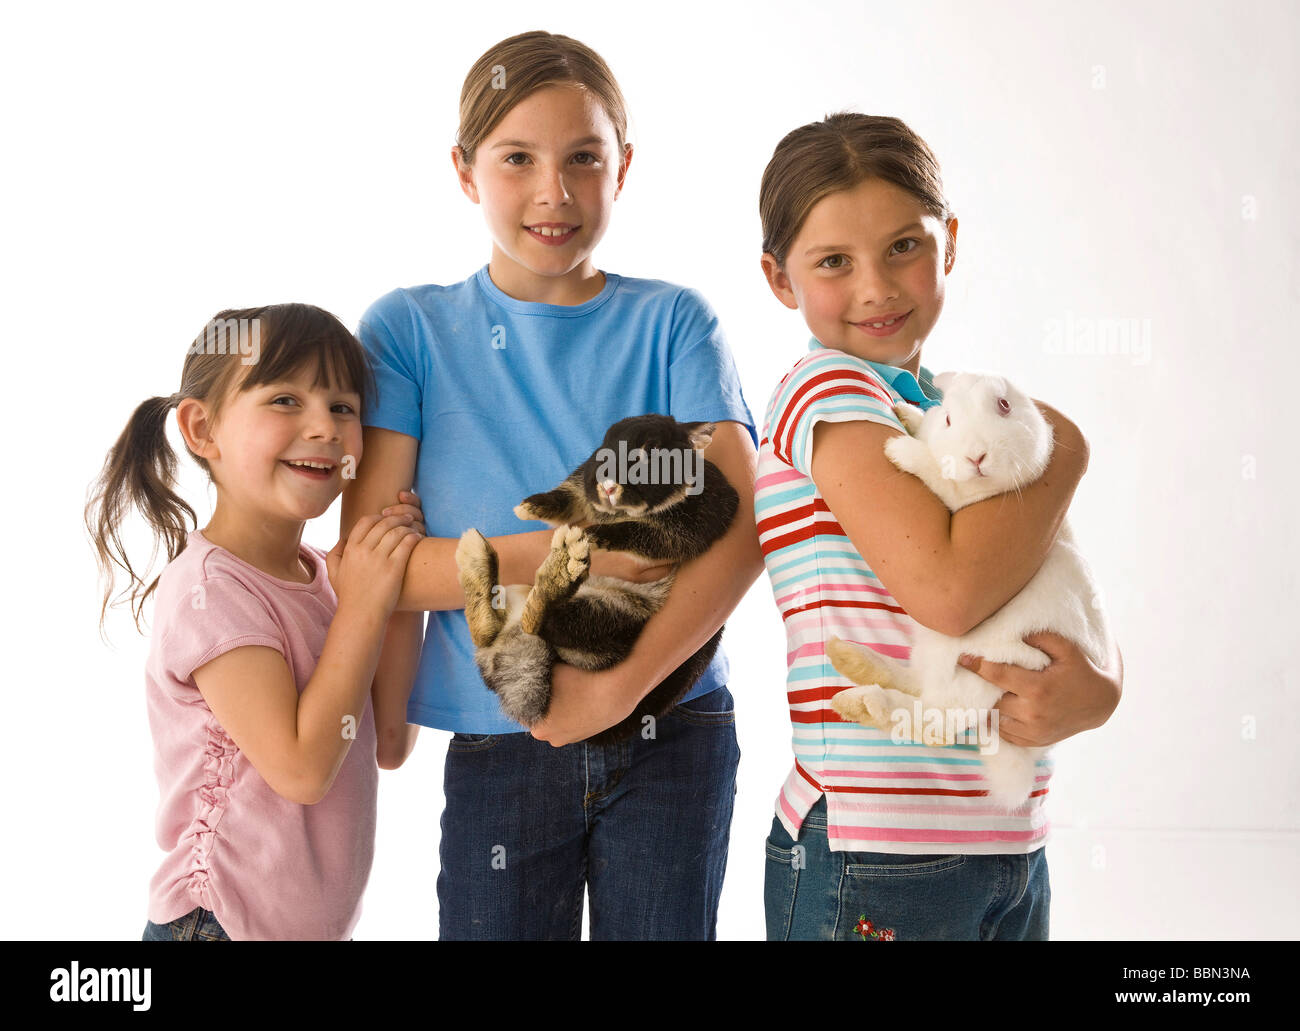 A group of three girls, the two older ones holding a rabbit in their arms Stock Photo